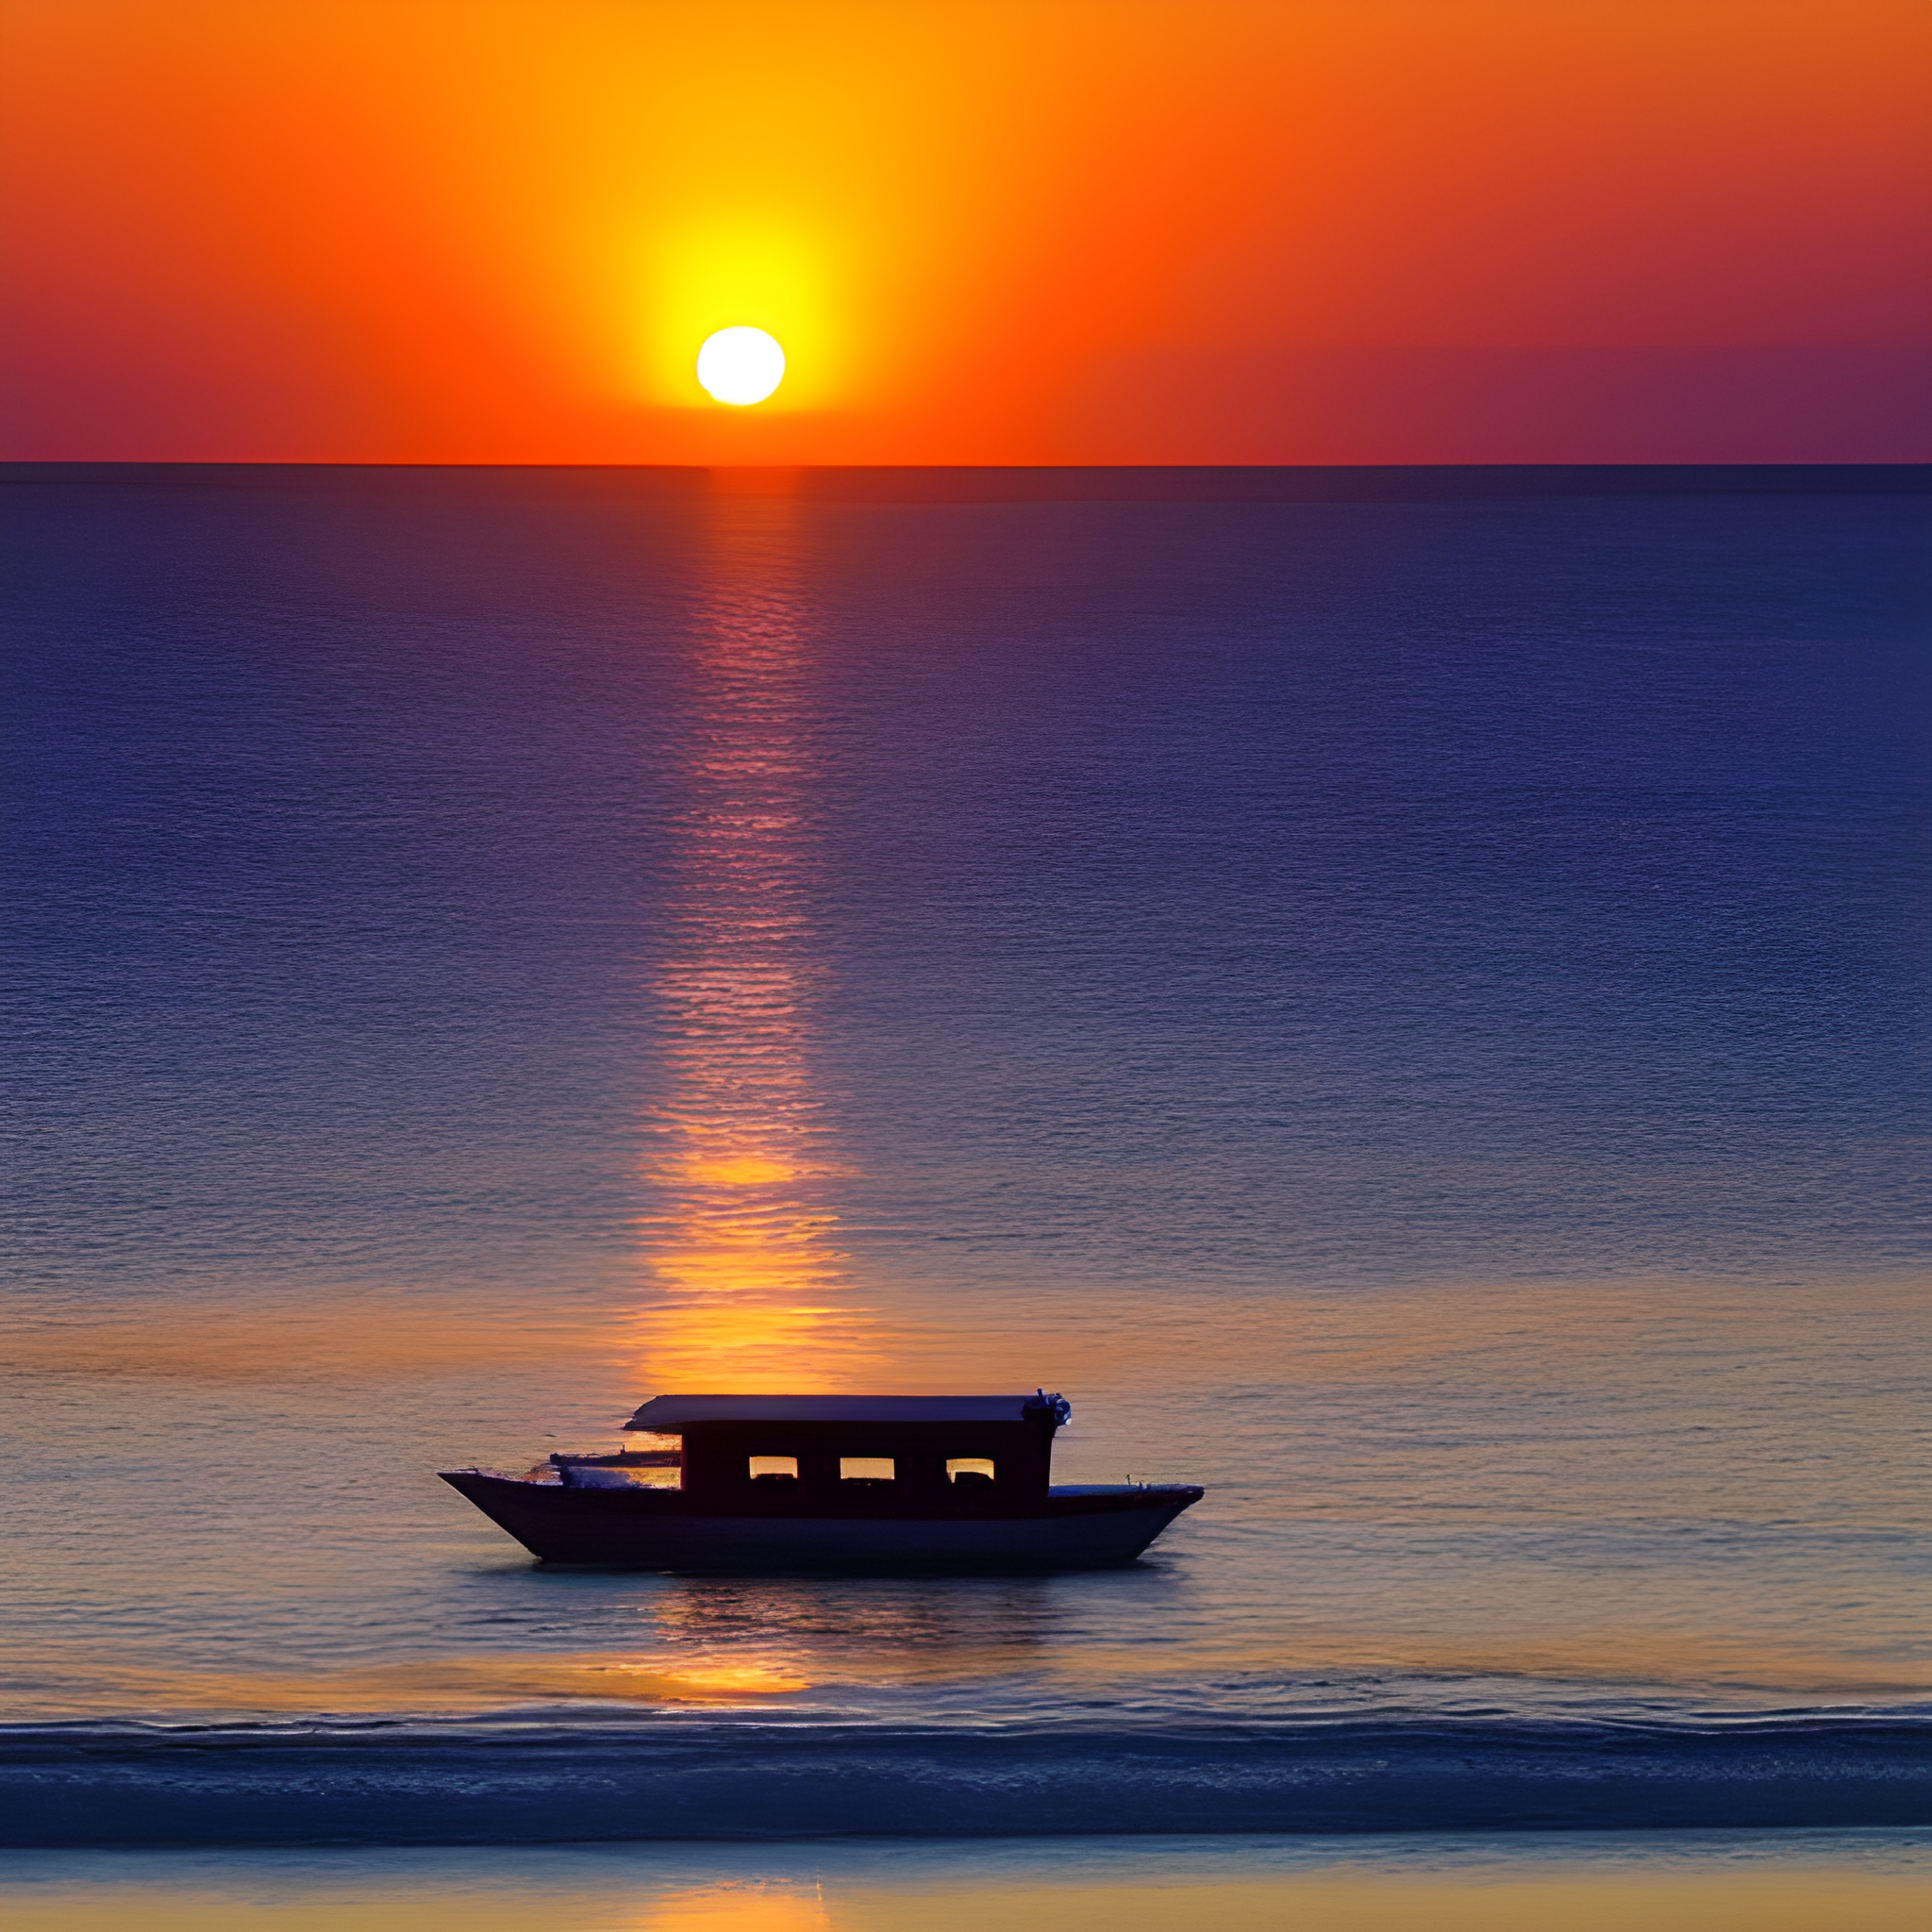 Image of a boat on the ocean with a setting sun in the background.